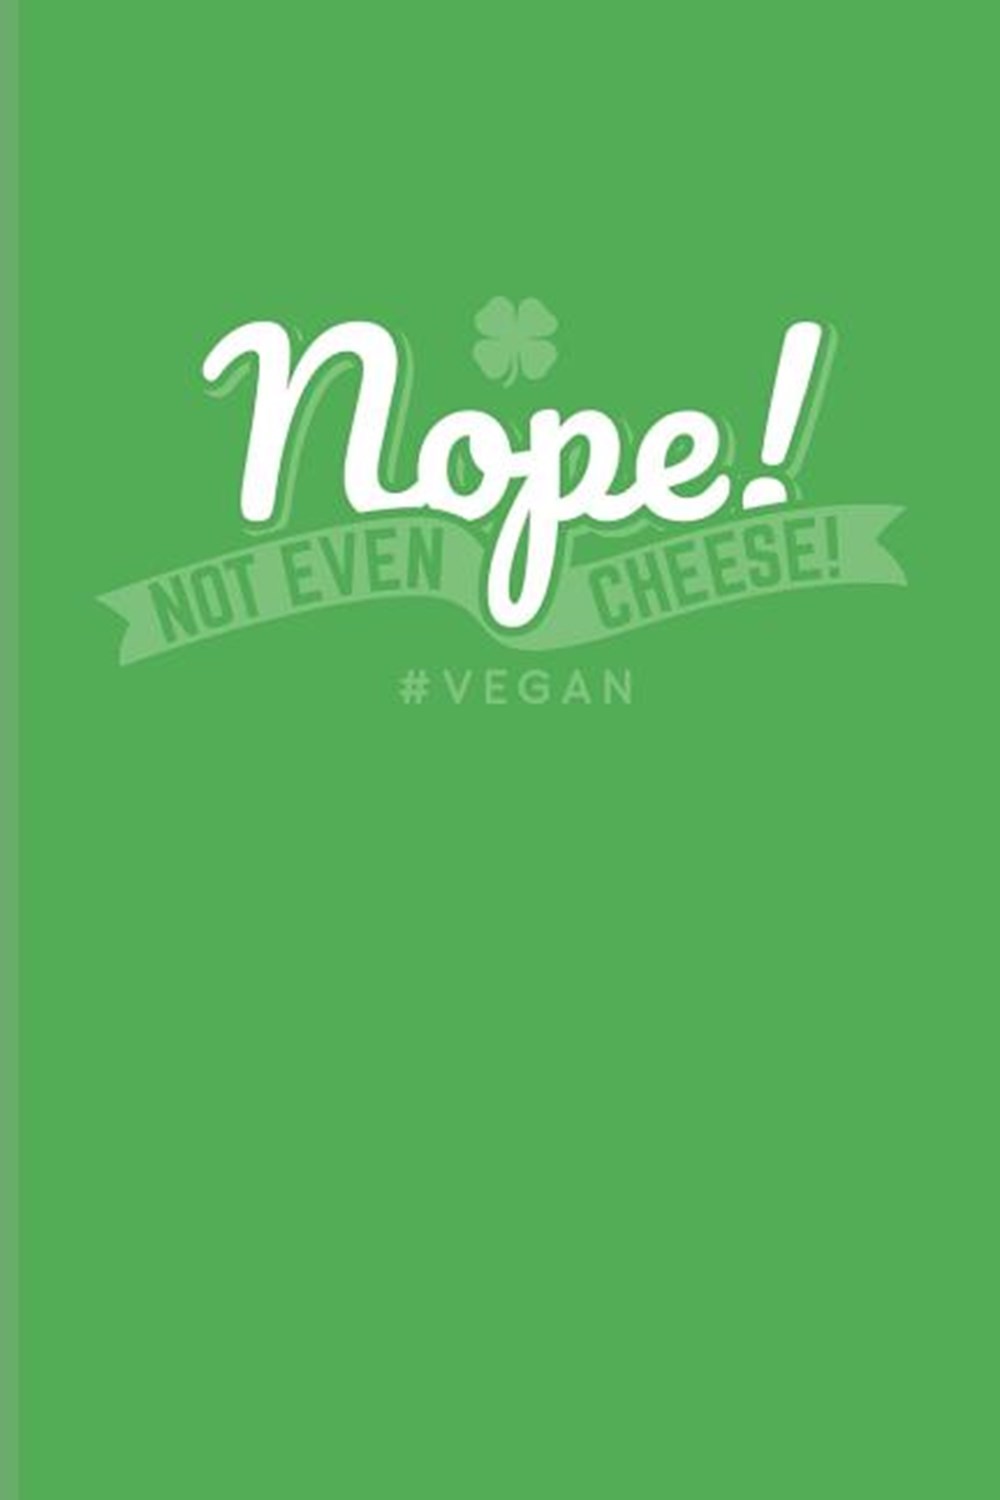 Nope! Not Even Cheese! #Vegan Cool Food Lover Journal For Plant Based Lifestyle, Recipe, Cookbook, K